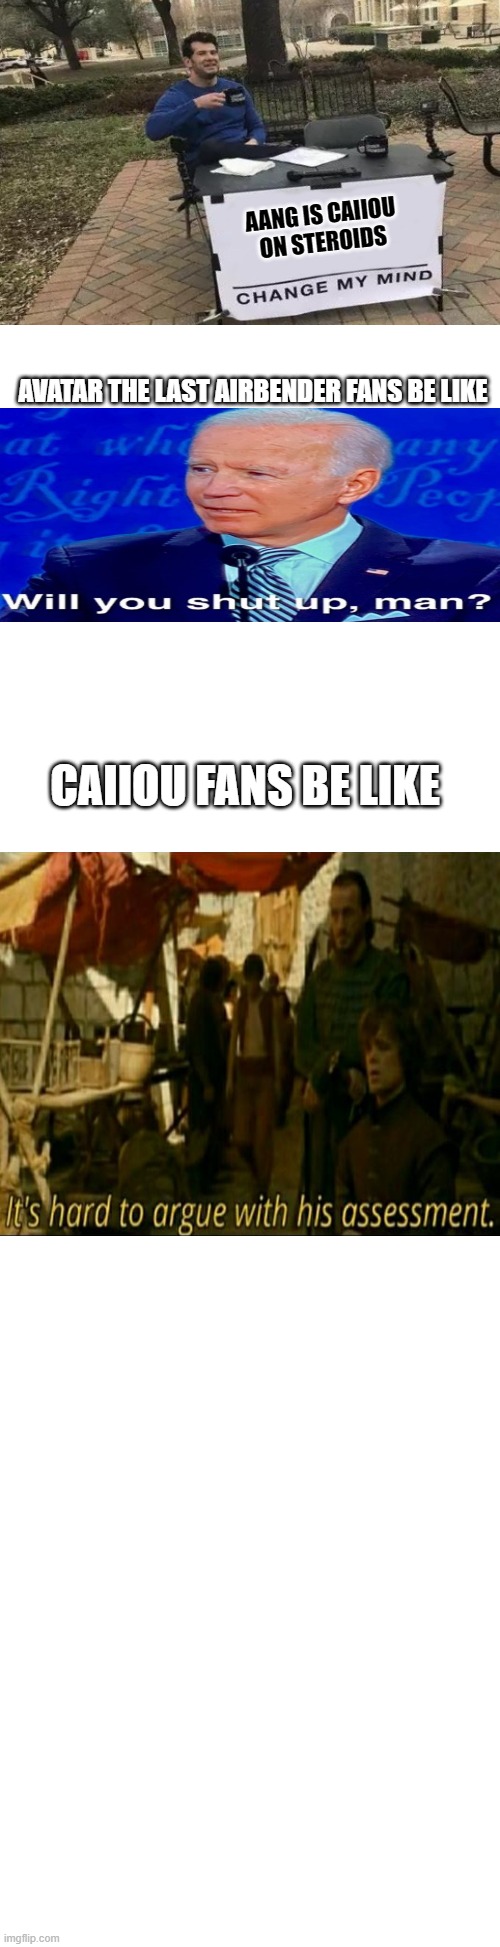 Oof | AANG IS CAIIOU ON STEROIDS; AVATAR THE LAST AIRBENDER FANS BE LIKE; CAIIOU FANS BE LIKE | image tagged in long blank white | made w/ Imgflip meme maker